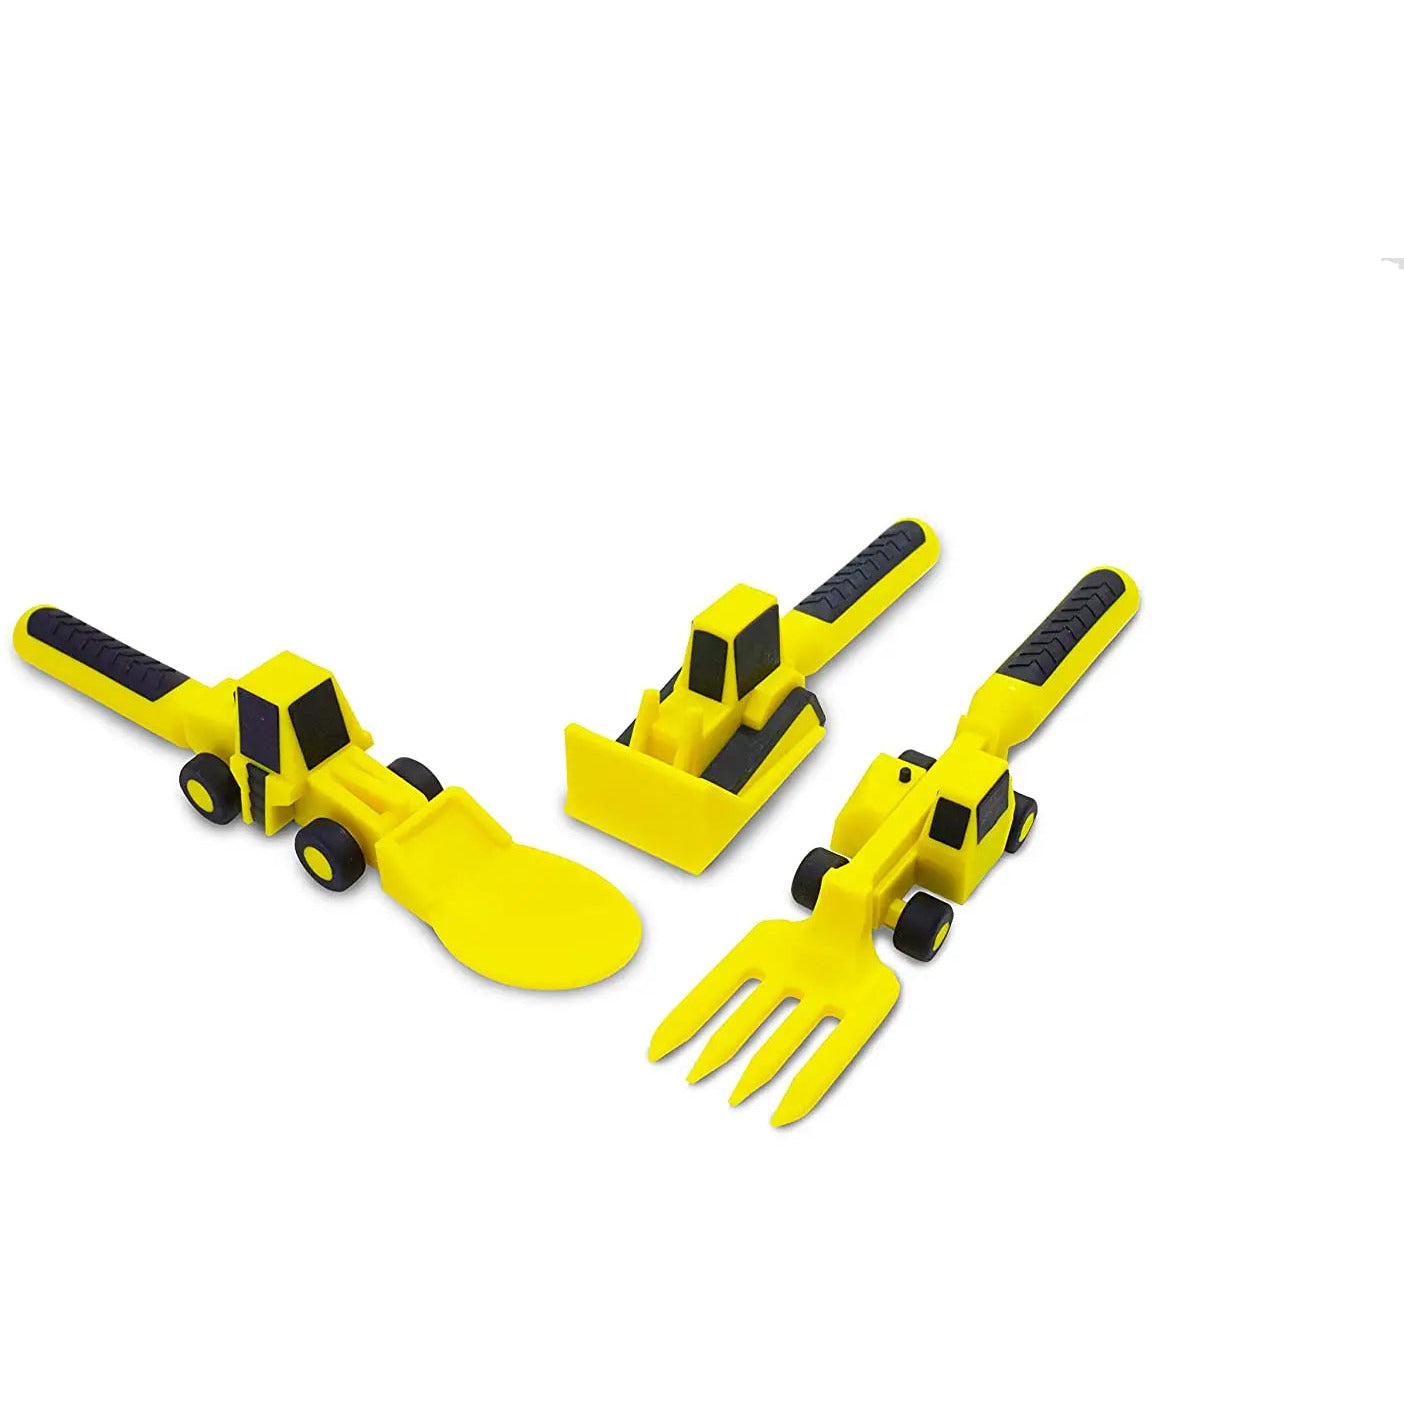 Constructive Eating Construction Themed 3 Piece Utensil Set CONSTRUCTIVE EATING